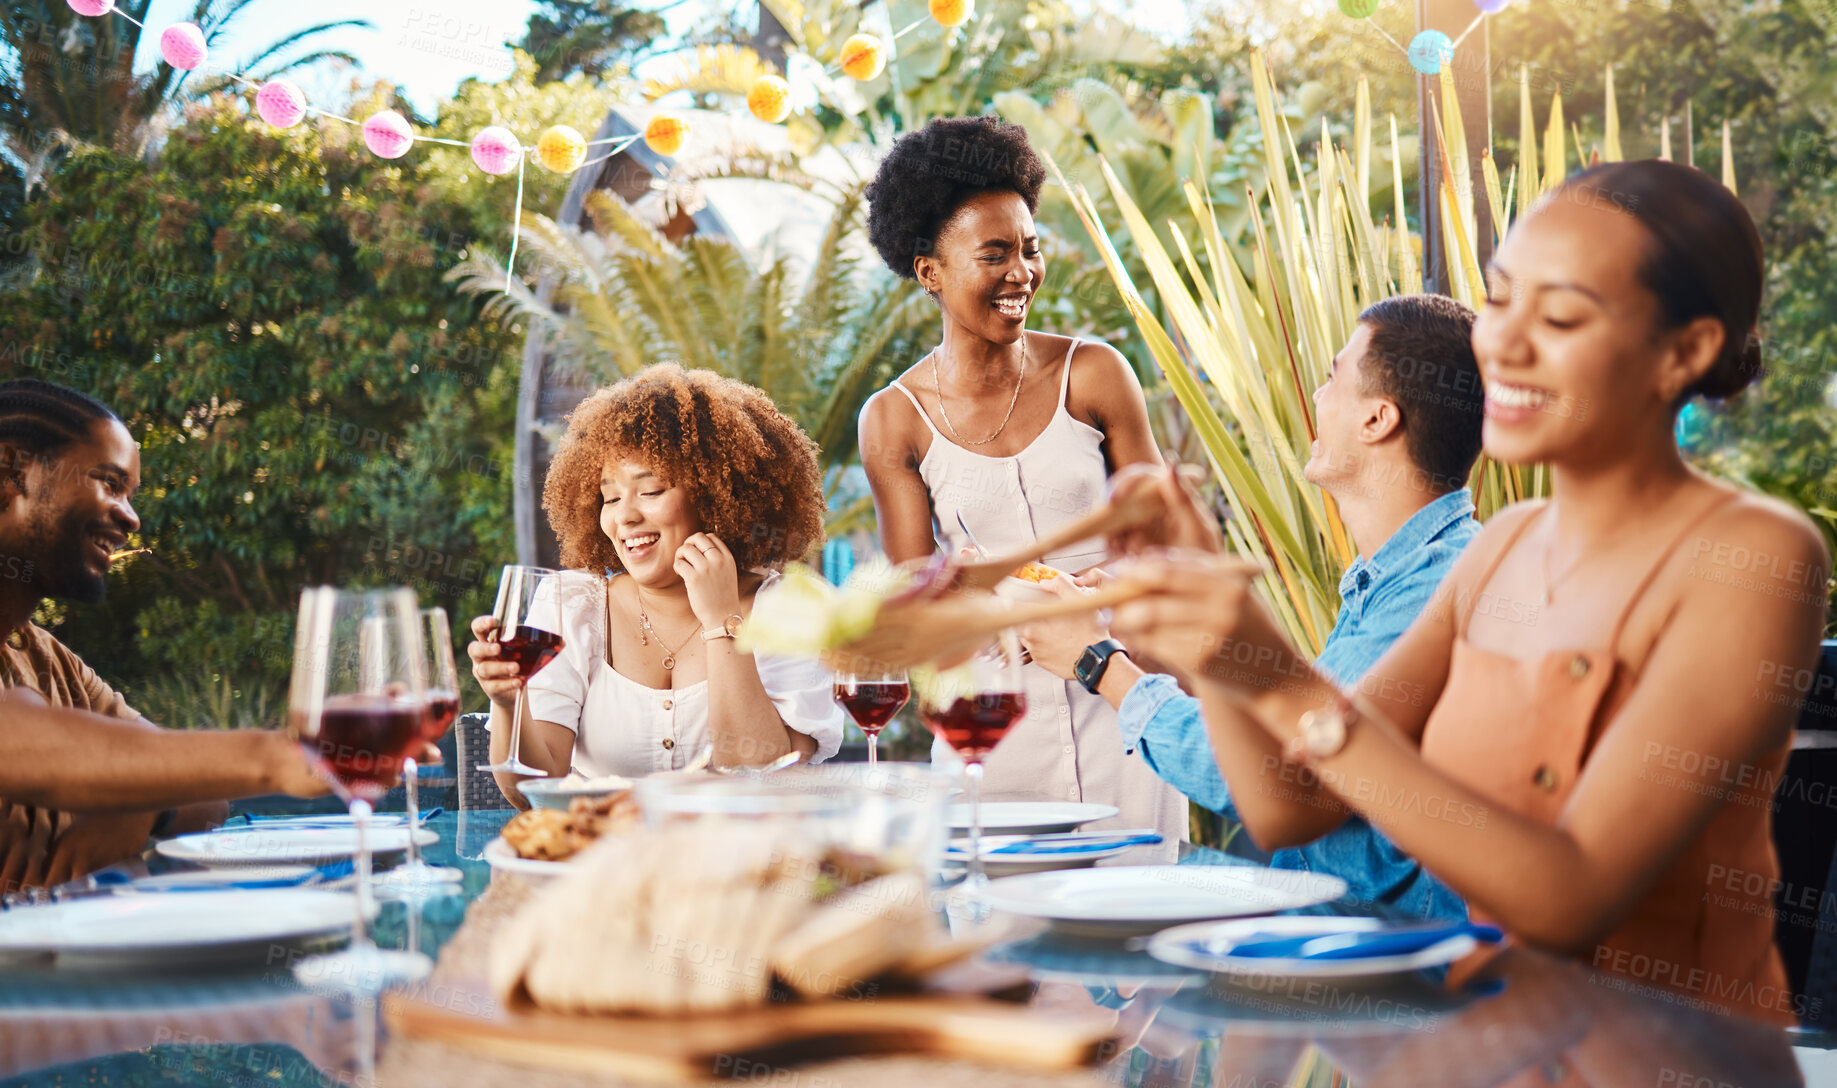 Buy stock photo Group of friends at lunch, party in garden with smile, eating and happy event with diversity. Outdoor dinner, men and women at table with food, wine and talking together in backyard with celebration.